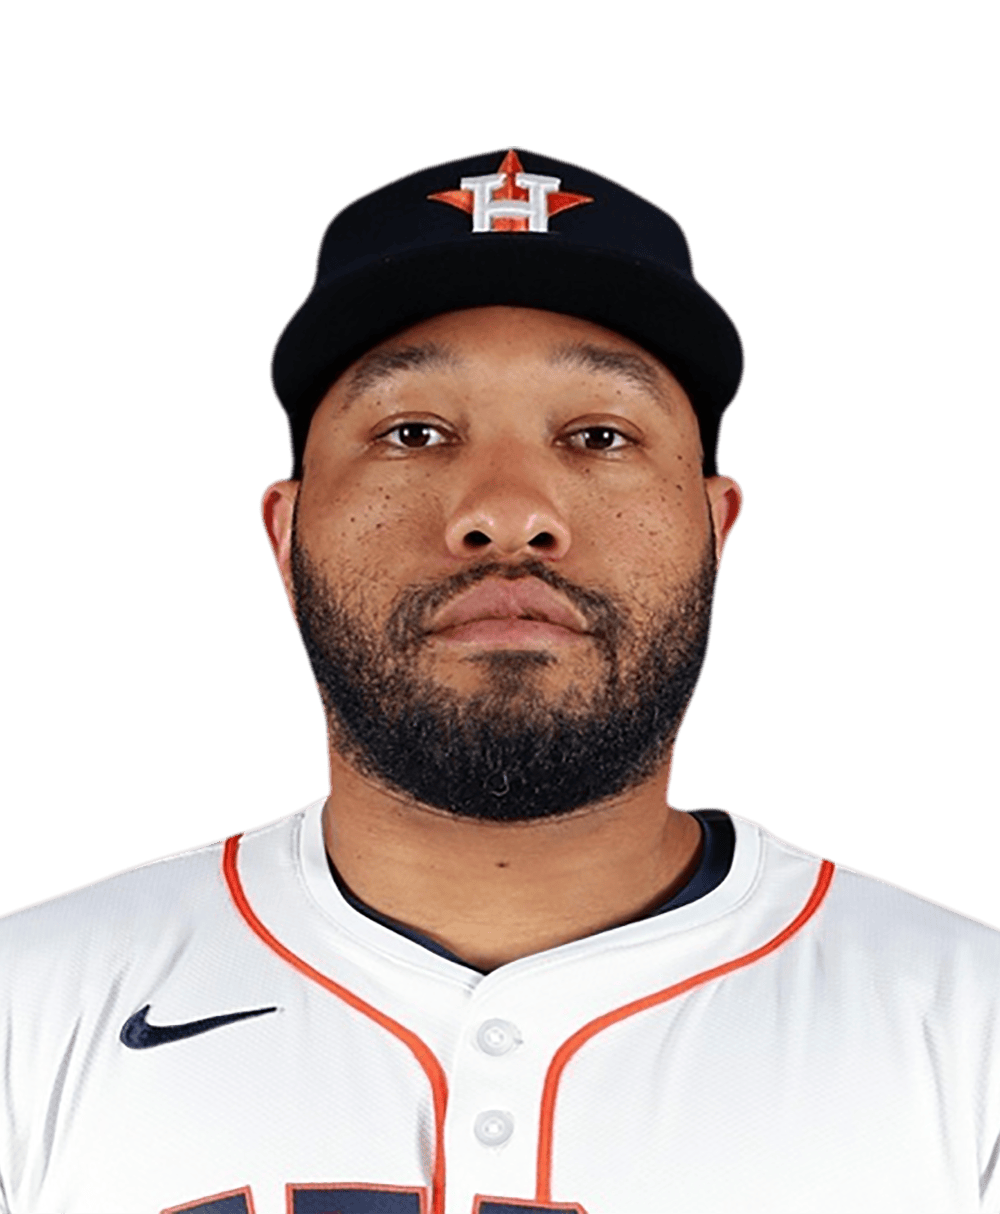 Astros' Jon Singleton hits his first homer since 2015, then makes